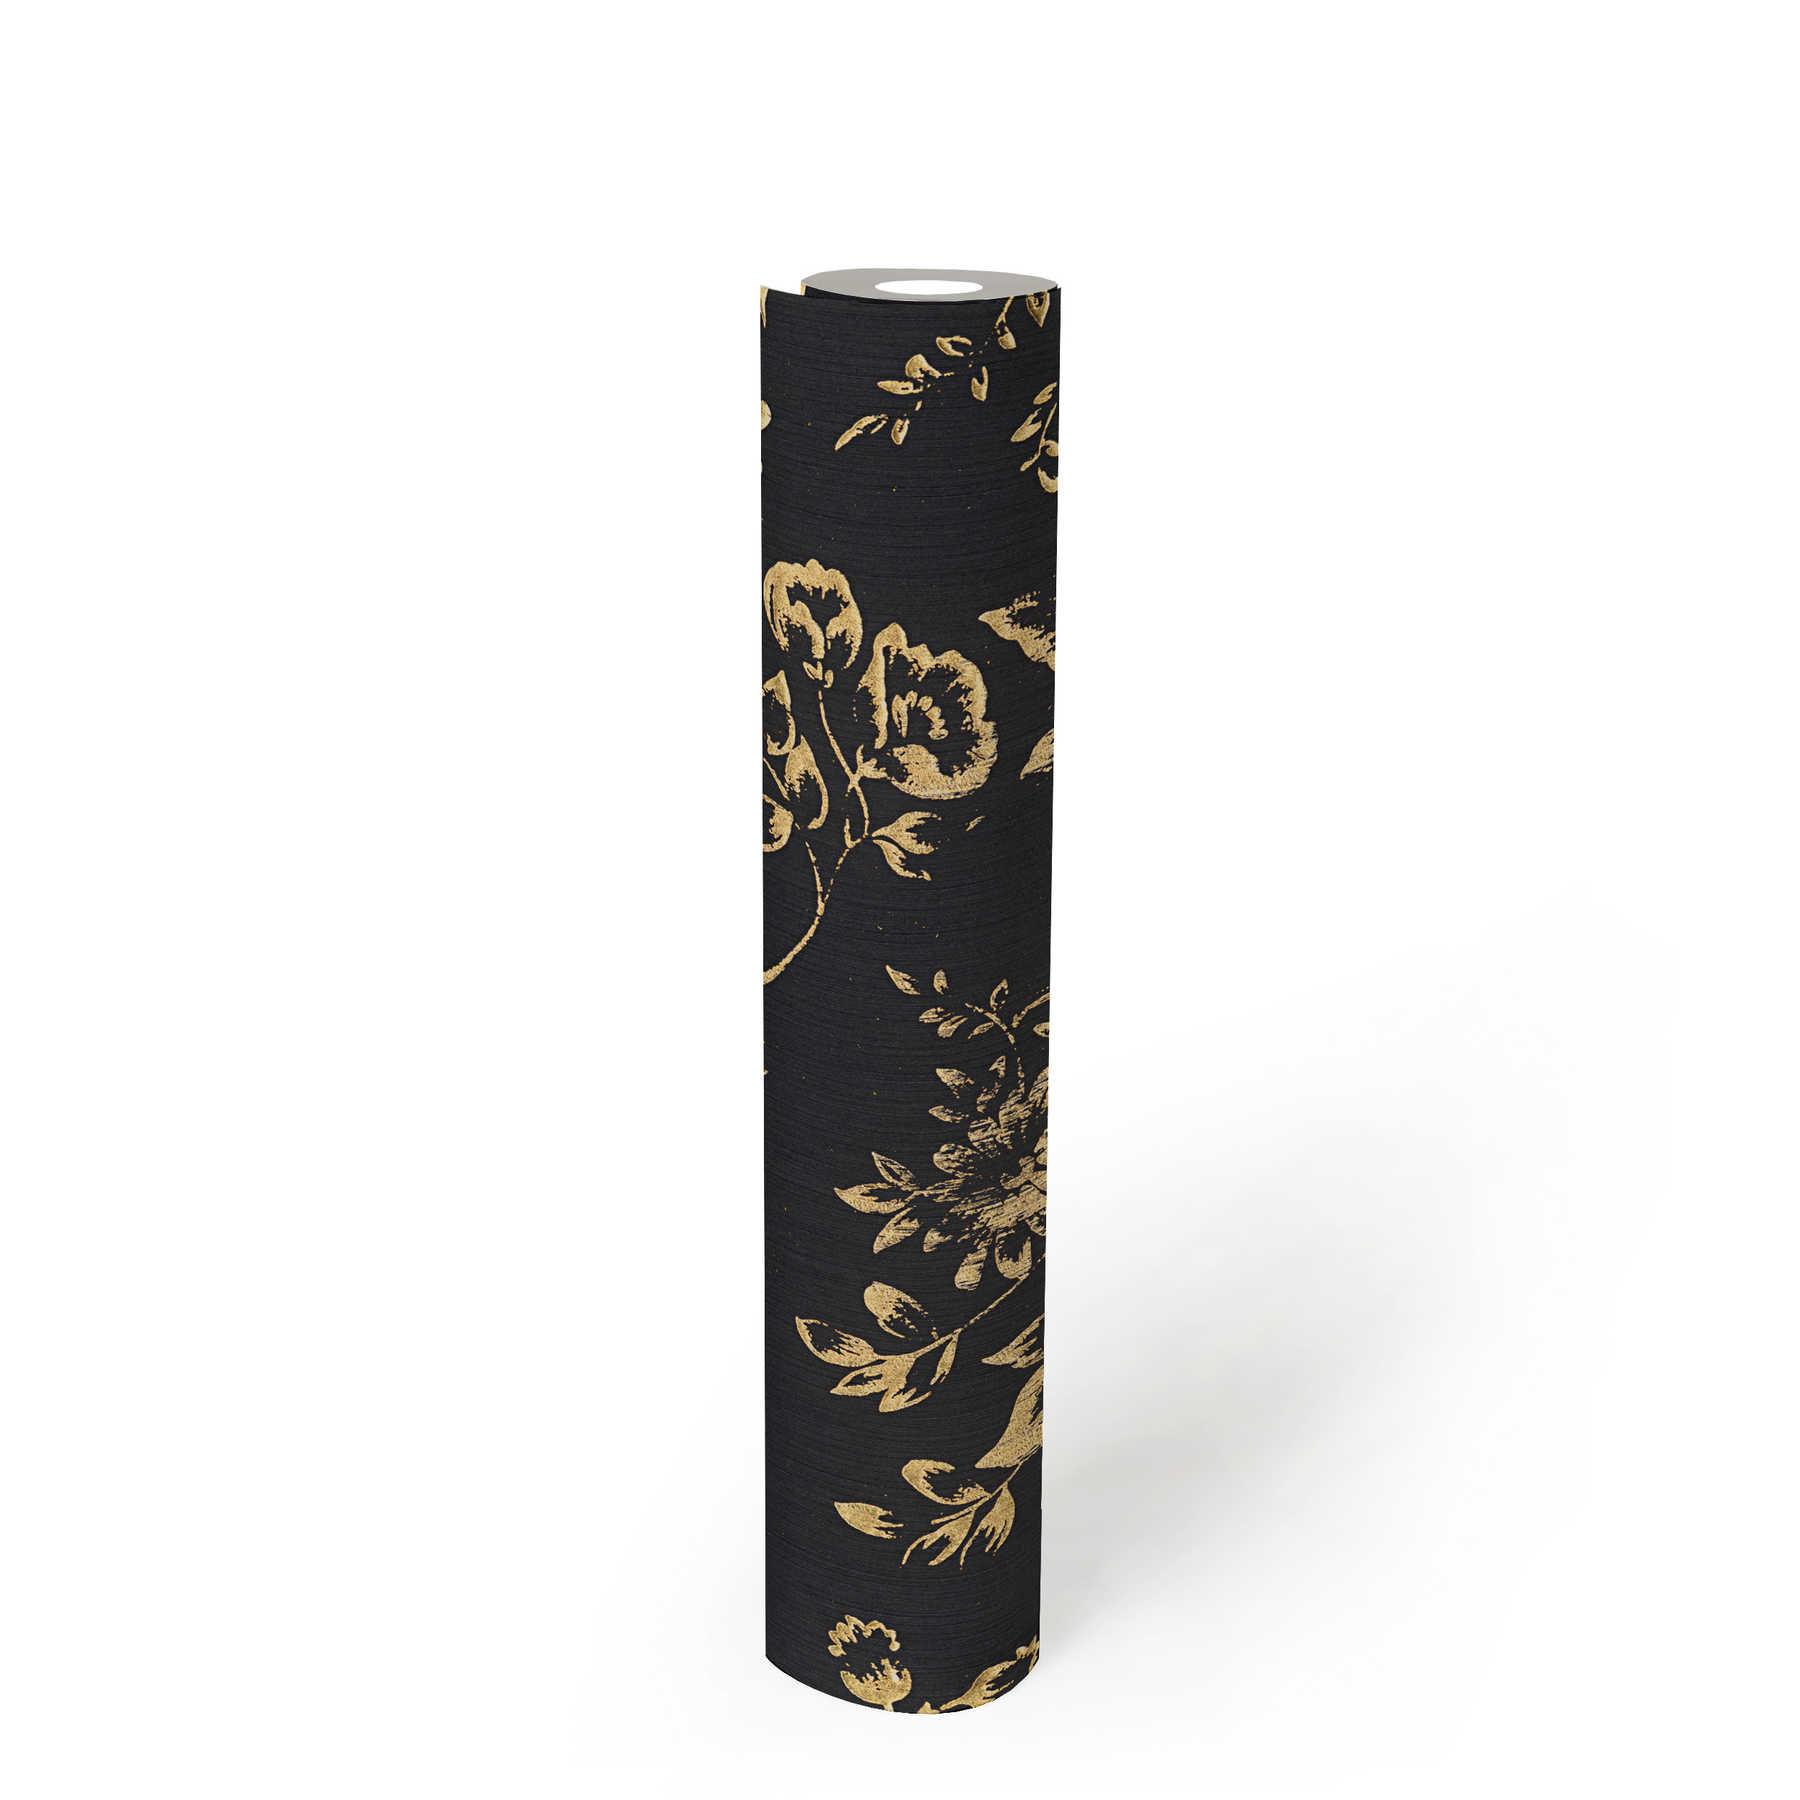             Textured wallpaper with golden floral pattern - gold, black
        